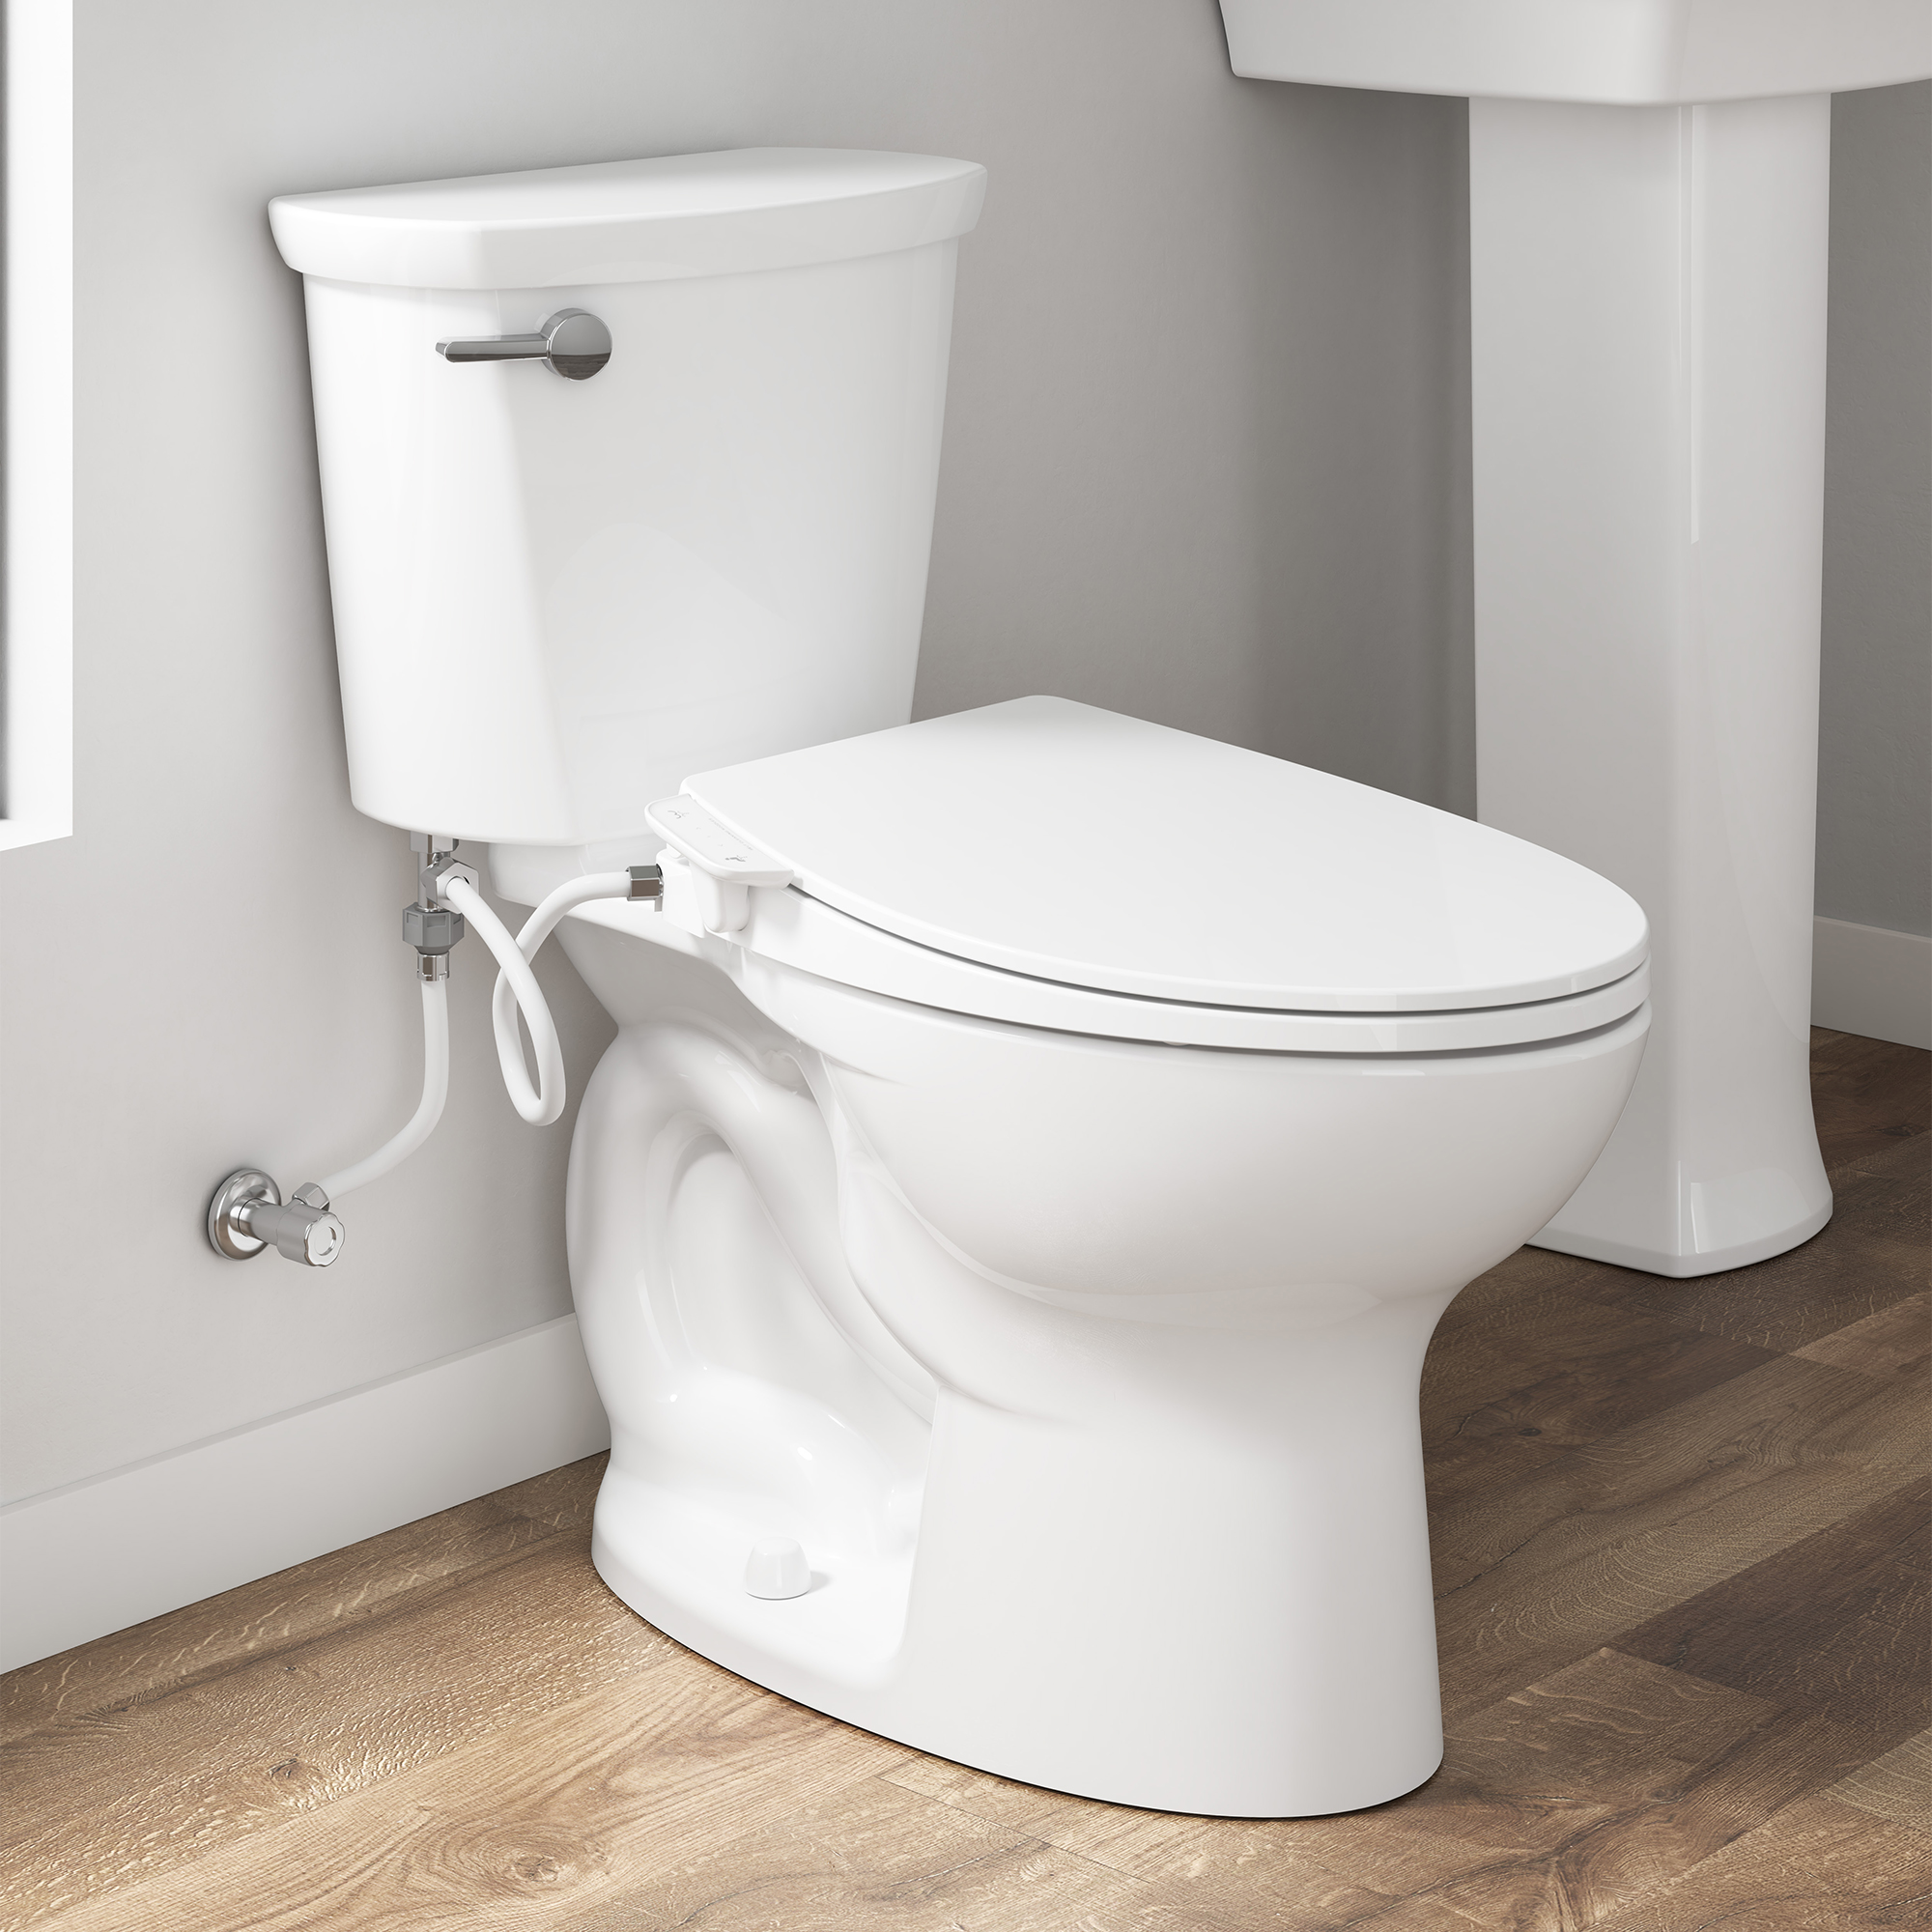 AquaWash® Essentials Non-Electric SpaLet® Bidet Seat With Manual Operation